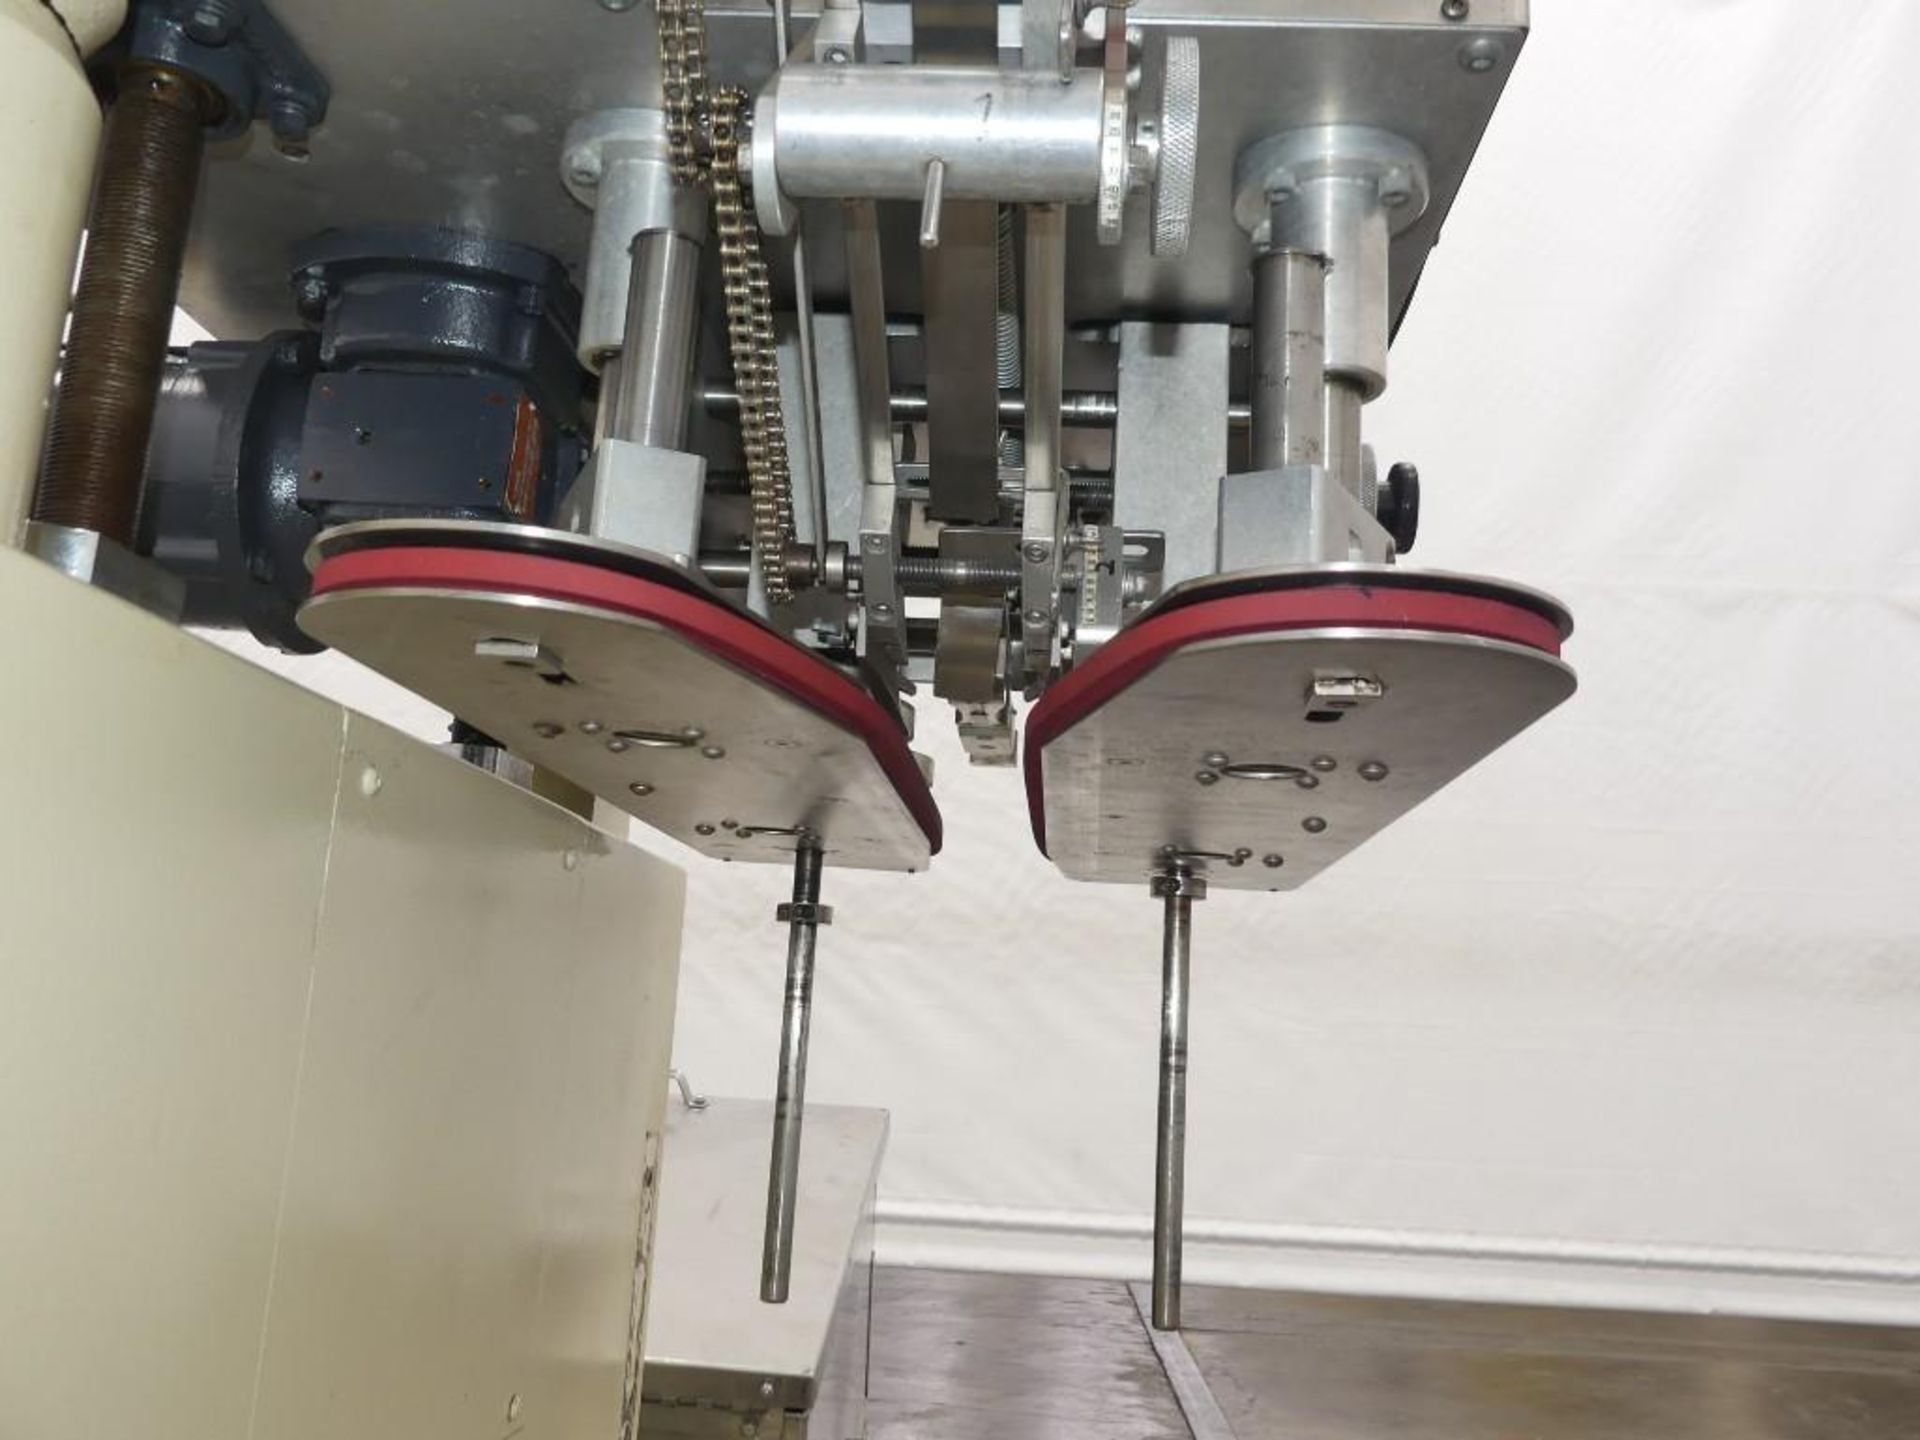 Kaps-All Model E4 Spindle Capper with a Feed Systems FSRF-24 Cap Feeder - Image 19 of 35